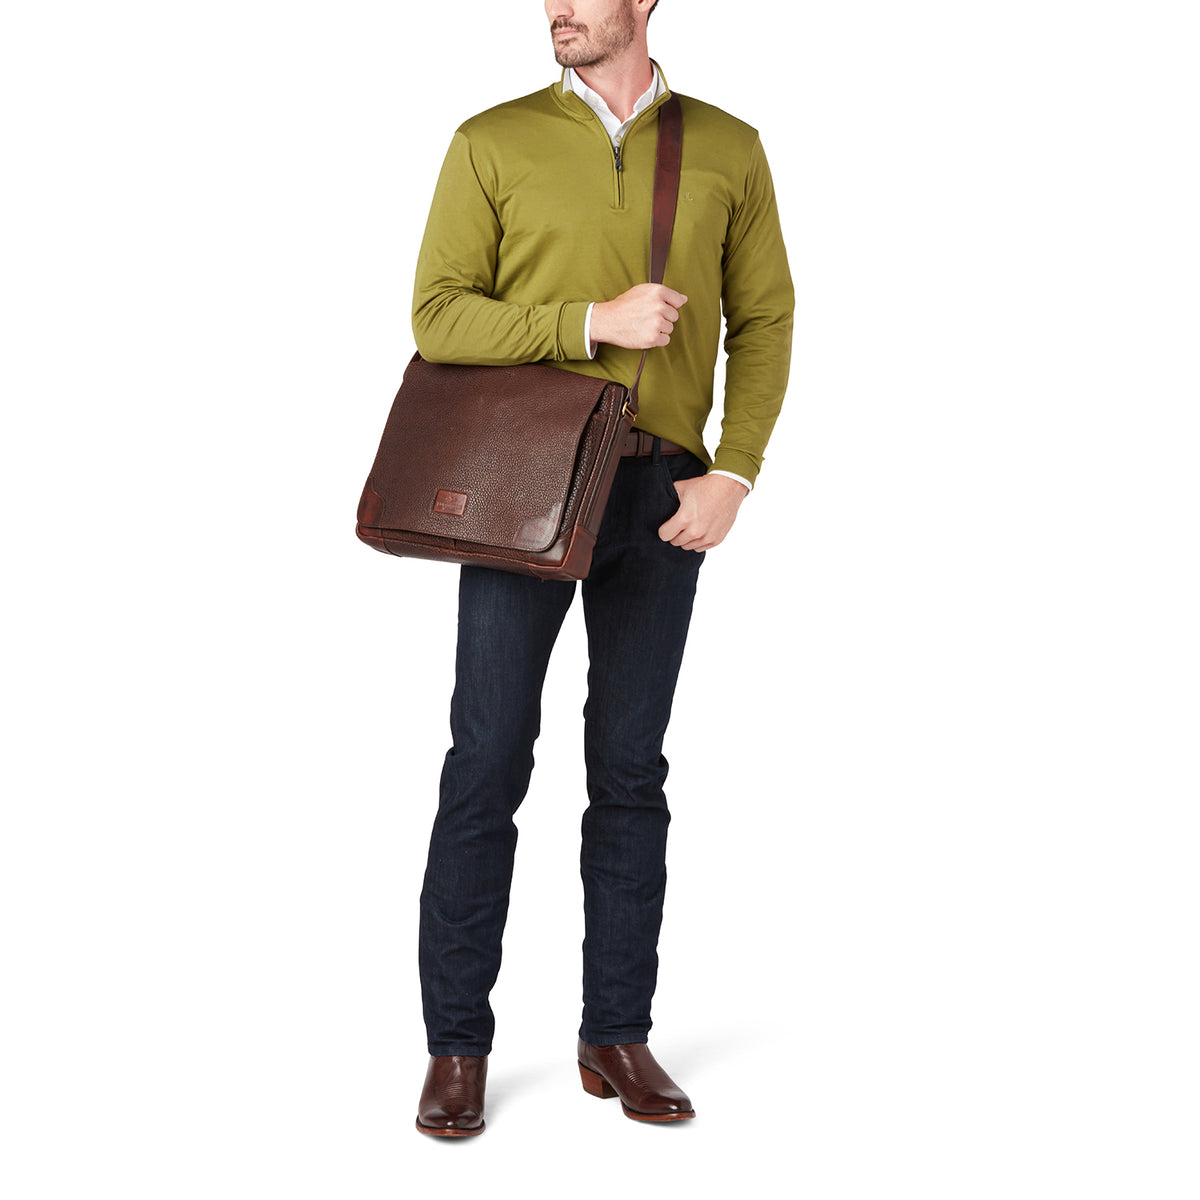 Lucchese | Messenger Bag :: Chocolate